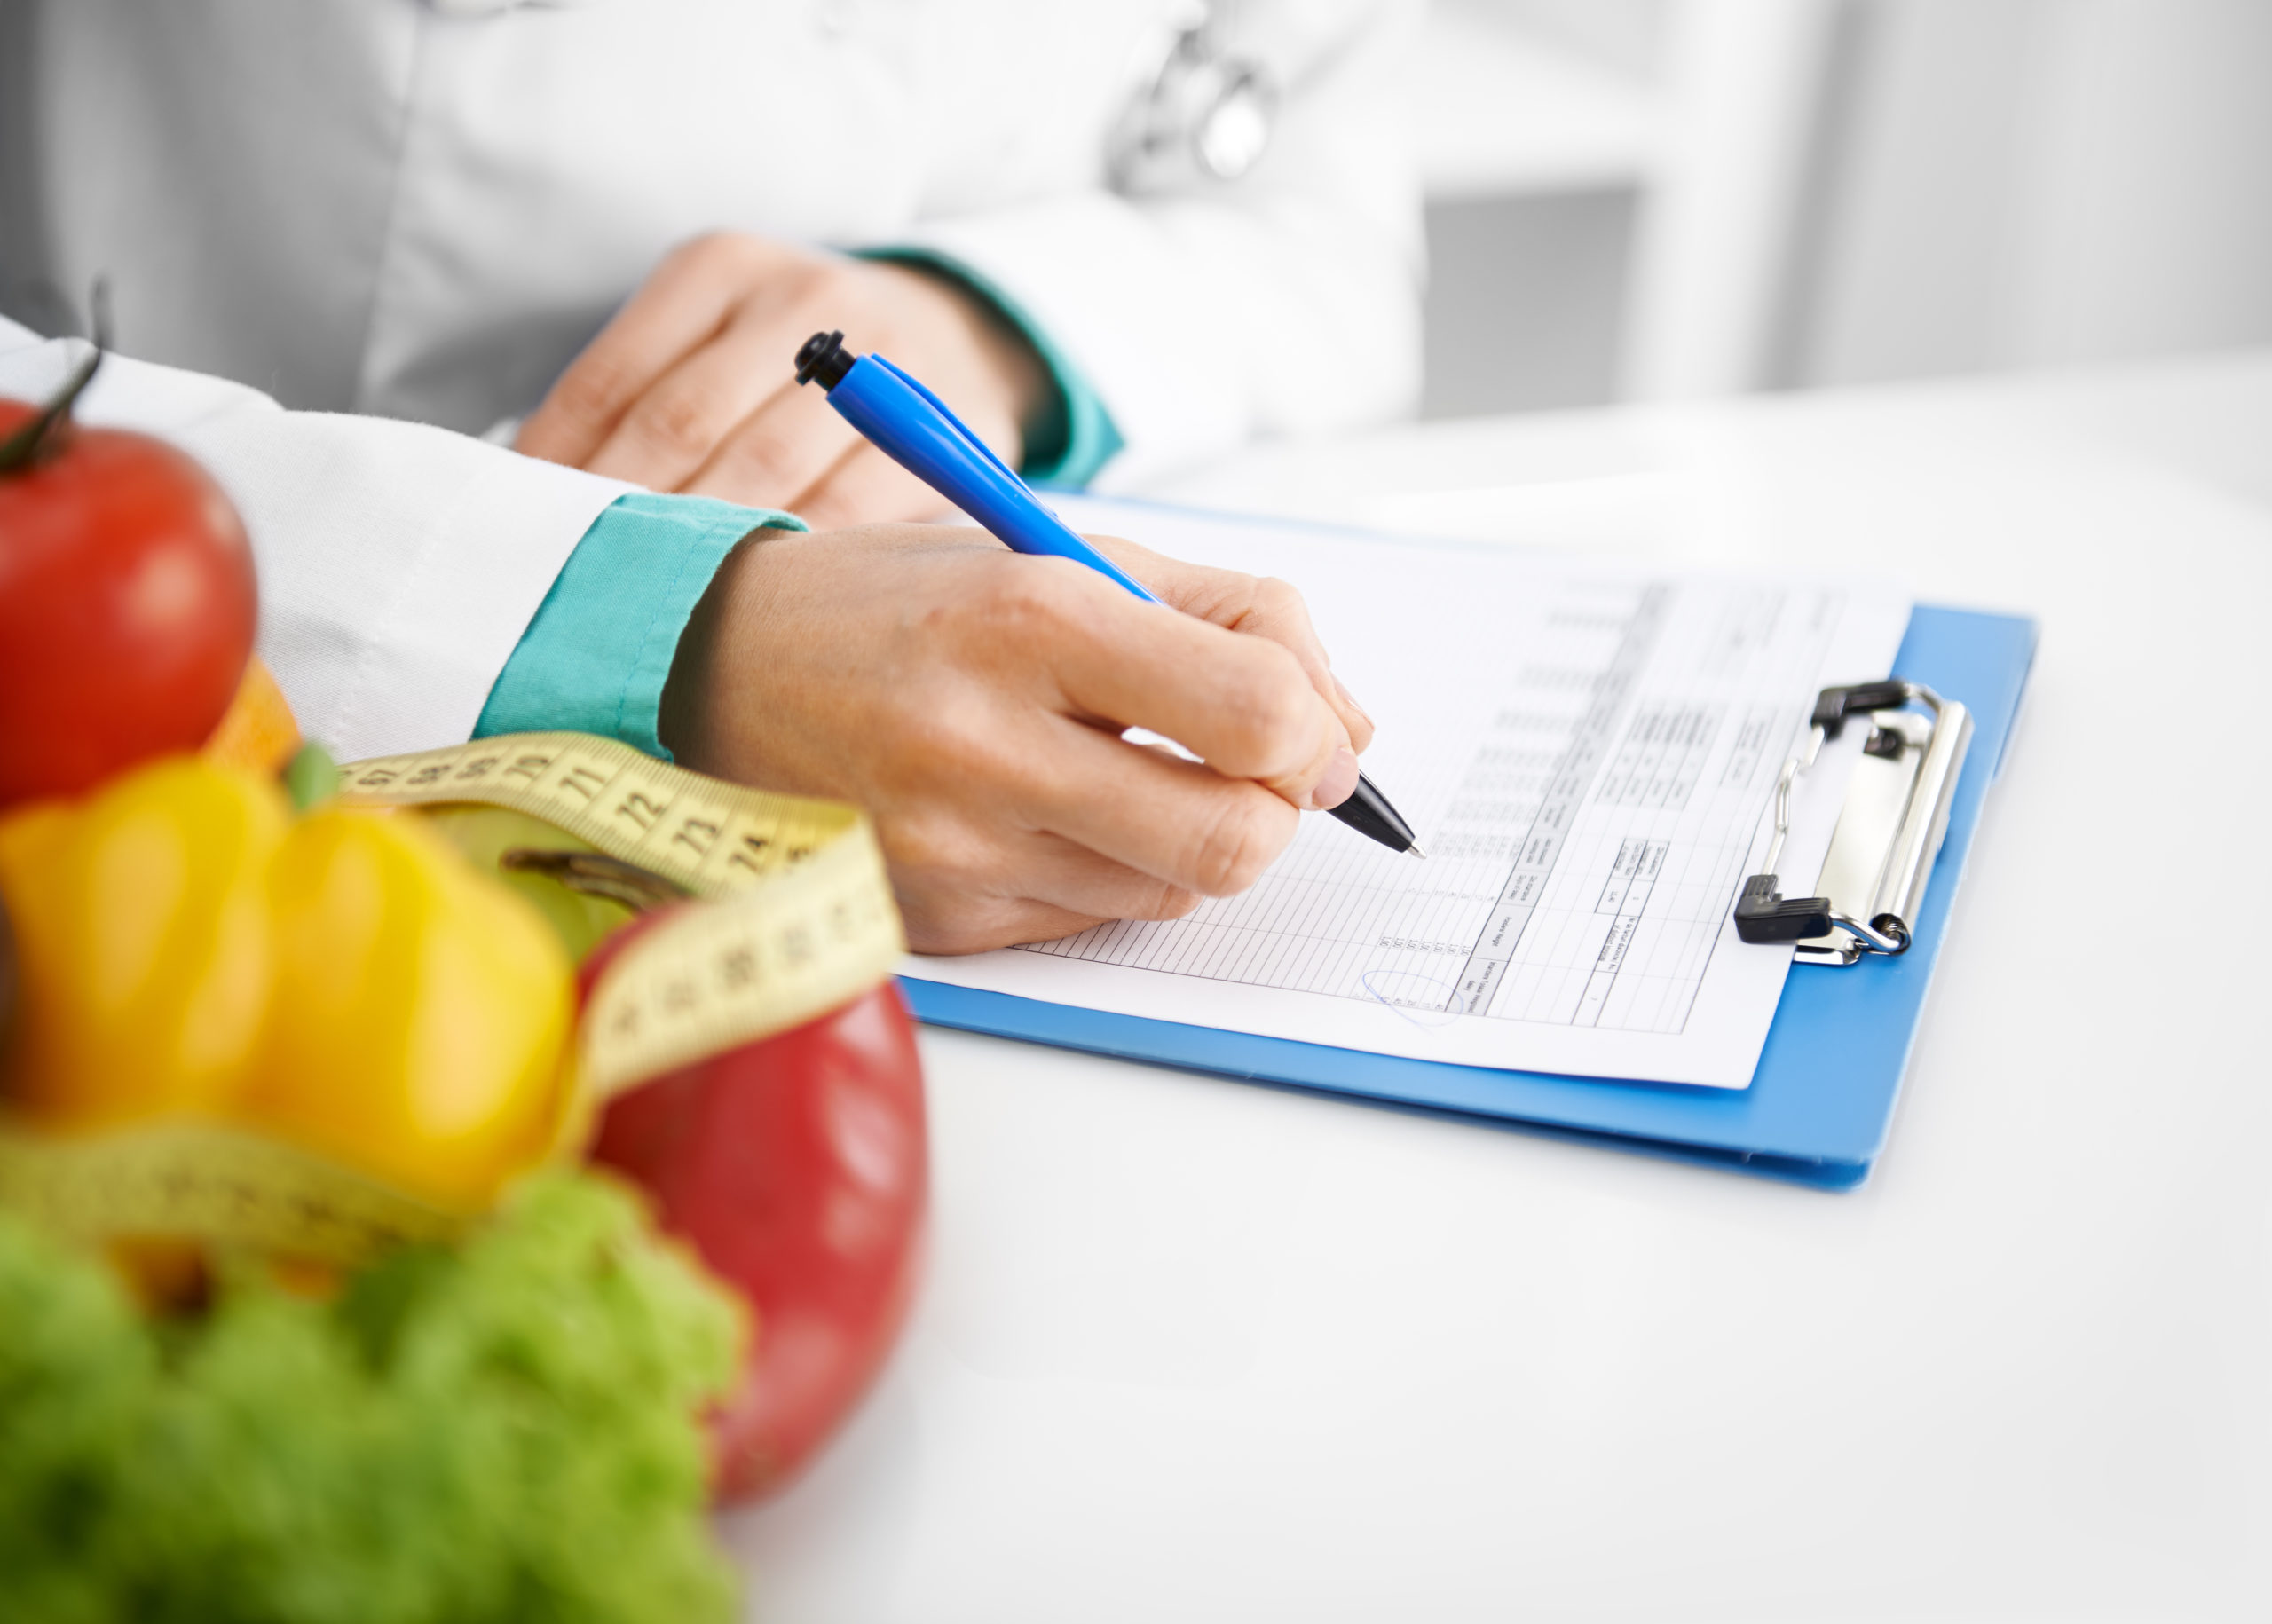 5 Steps For Finding Work As A Nutritionist